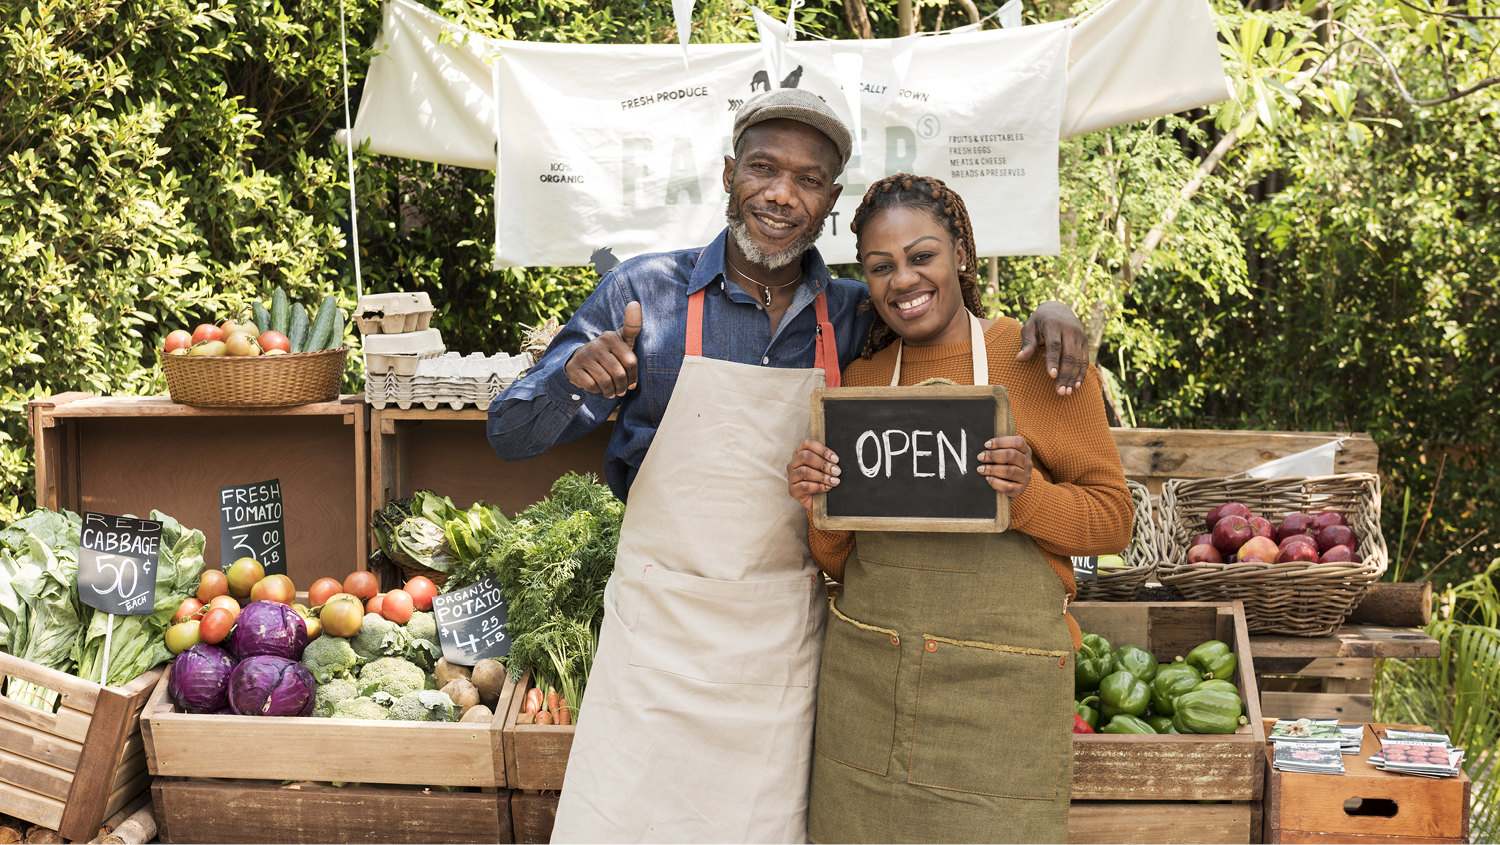 A happy couple in aprons stands in front of a produce stand. He has his arm over her shoulder and is giving a thumbs up while she holds a small chalkboard reading "Open." 